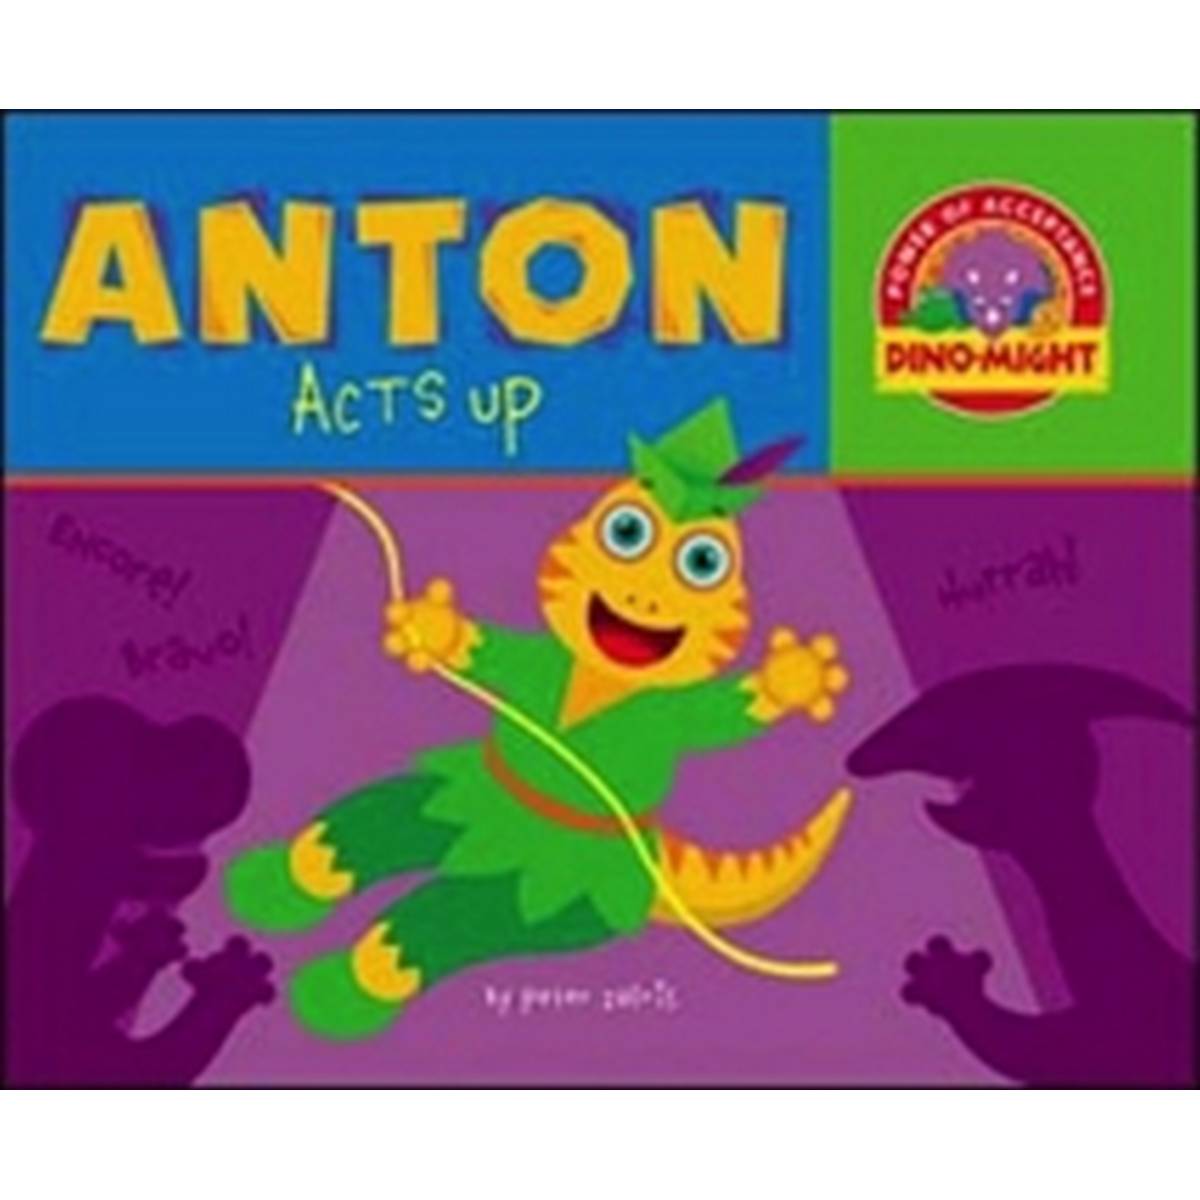 Dino-Might Bullying Reader - Anton Acts Up